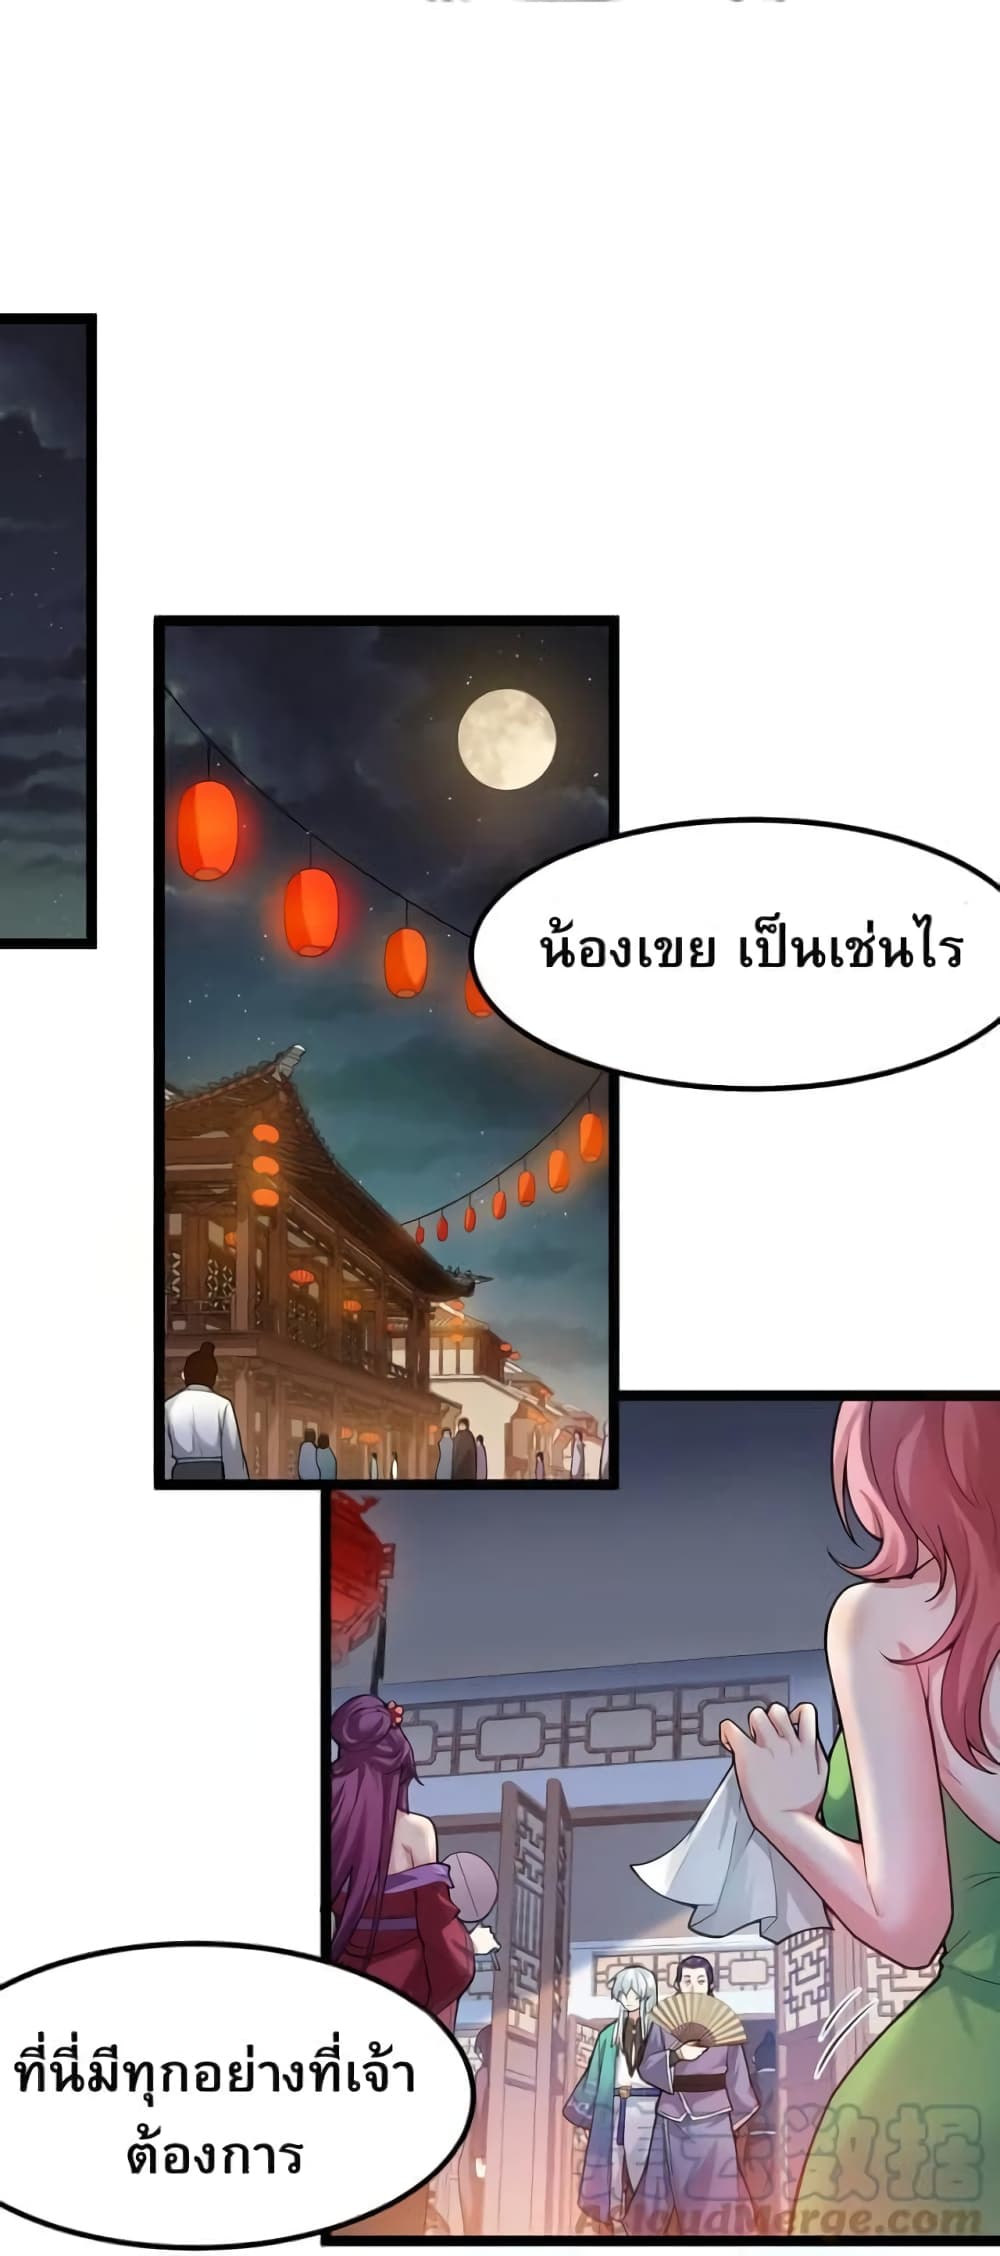 Godsian Masian from Another World ตอนที่ 104 (10)